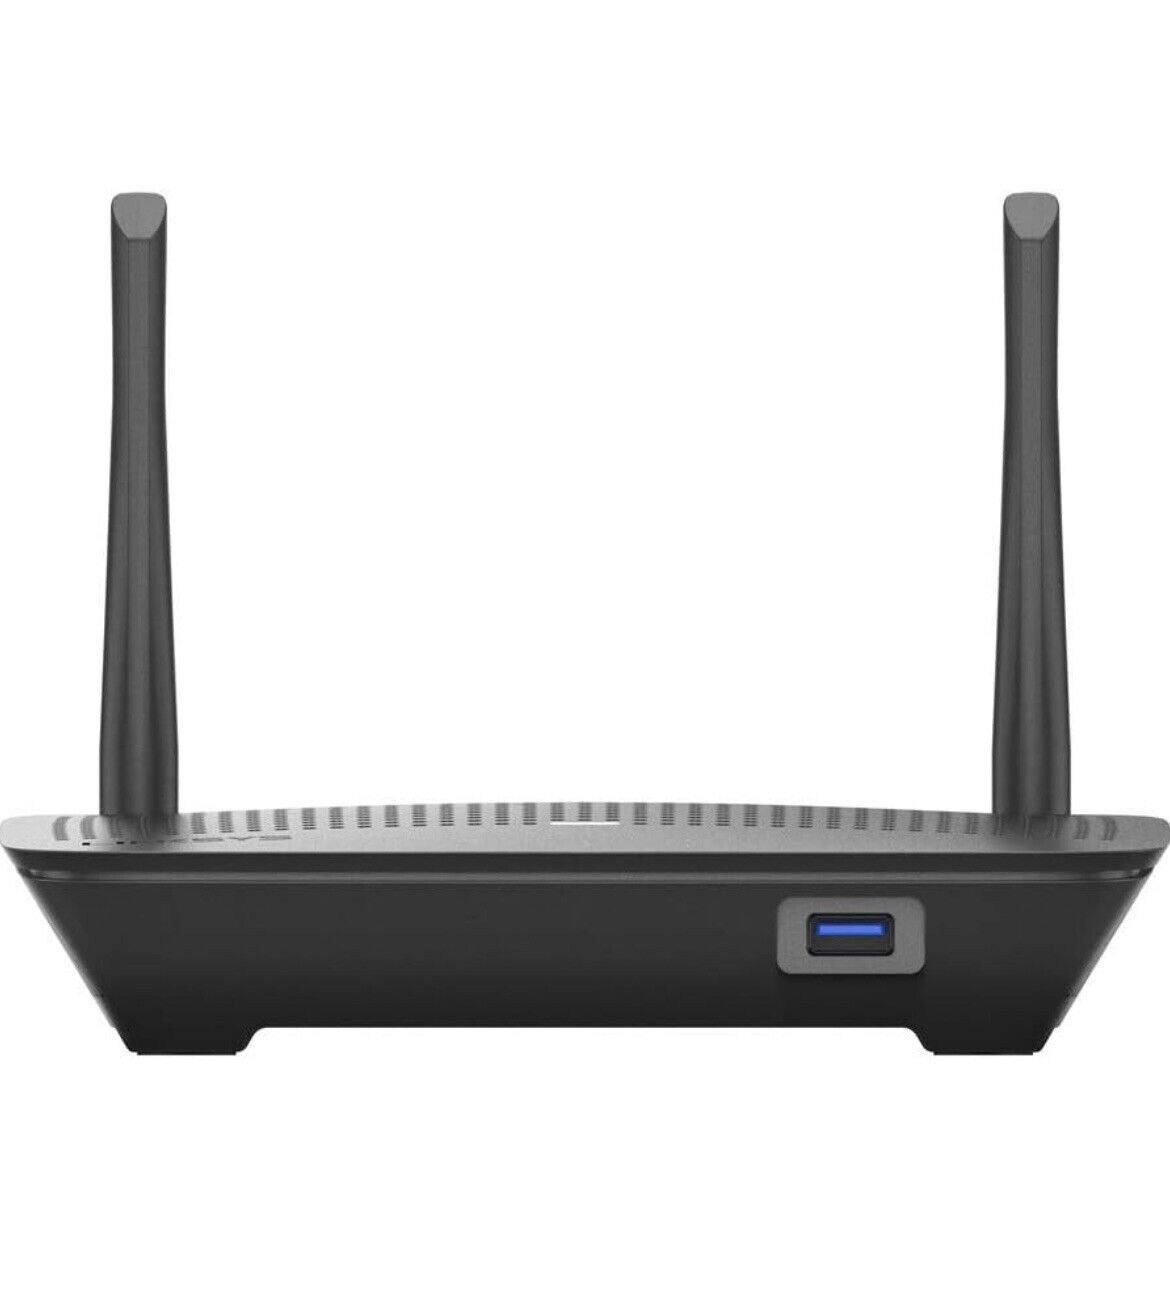 Linksys (EA6350-4B) Wi-Fi 5 Router Home AC1200 Dual Band Router, Internet Router